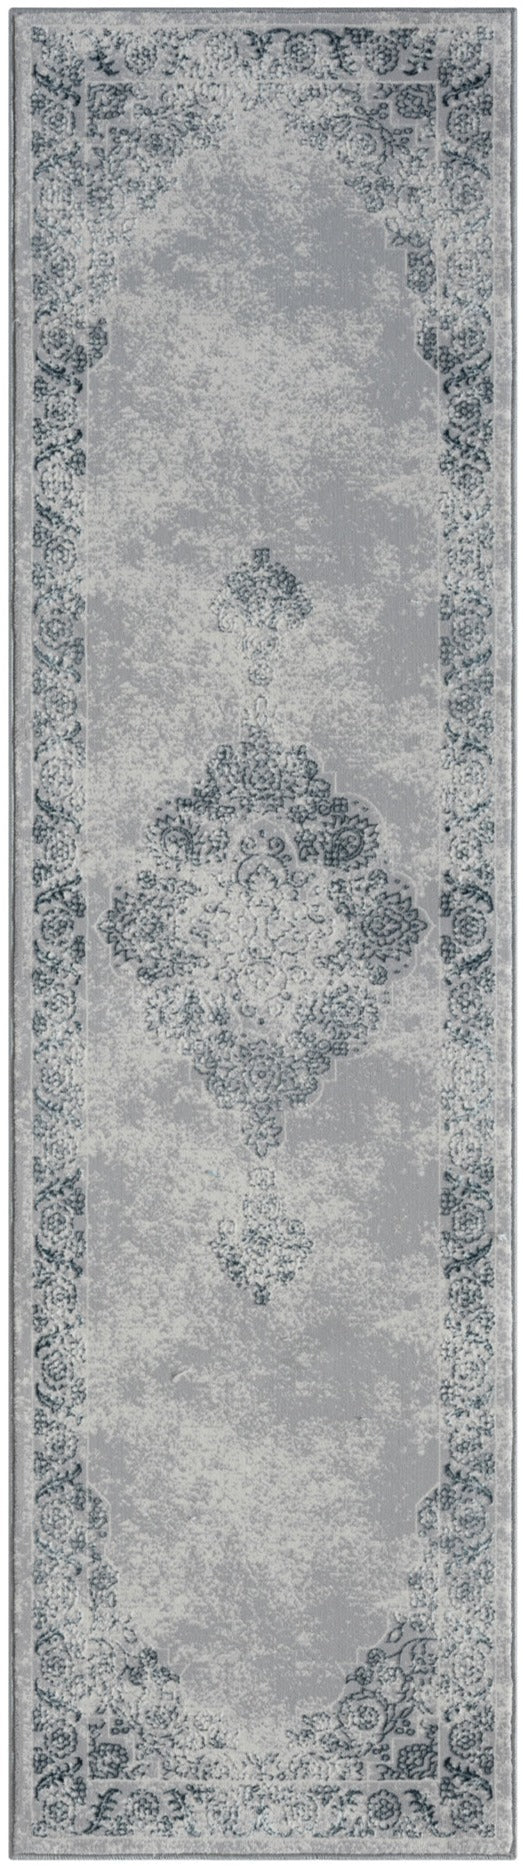 American cover design / Persian weavers Boutique 452 Distressed Slate Rug